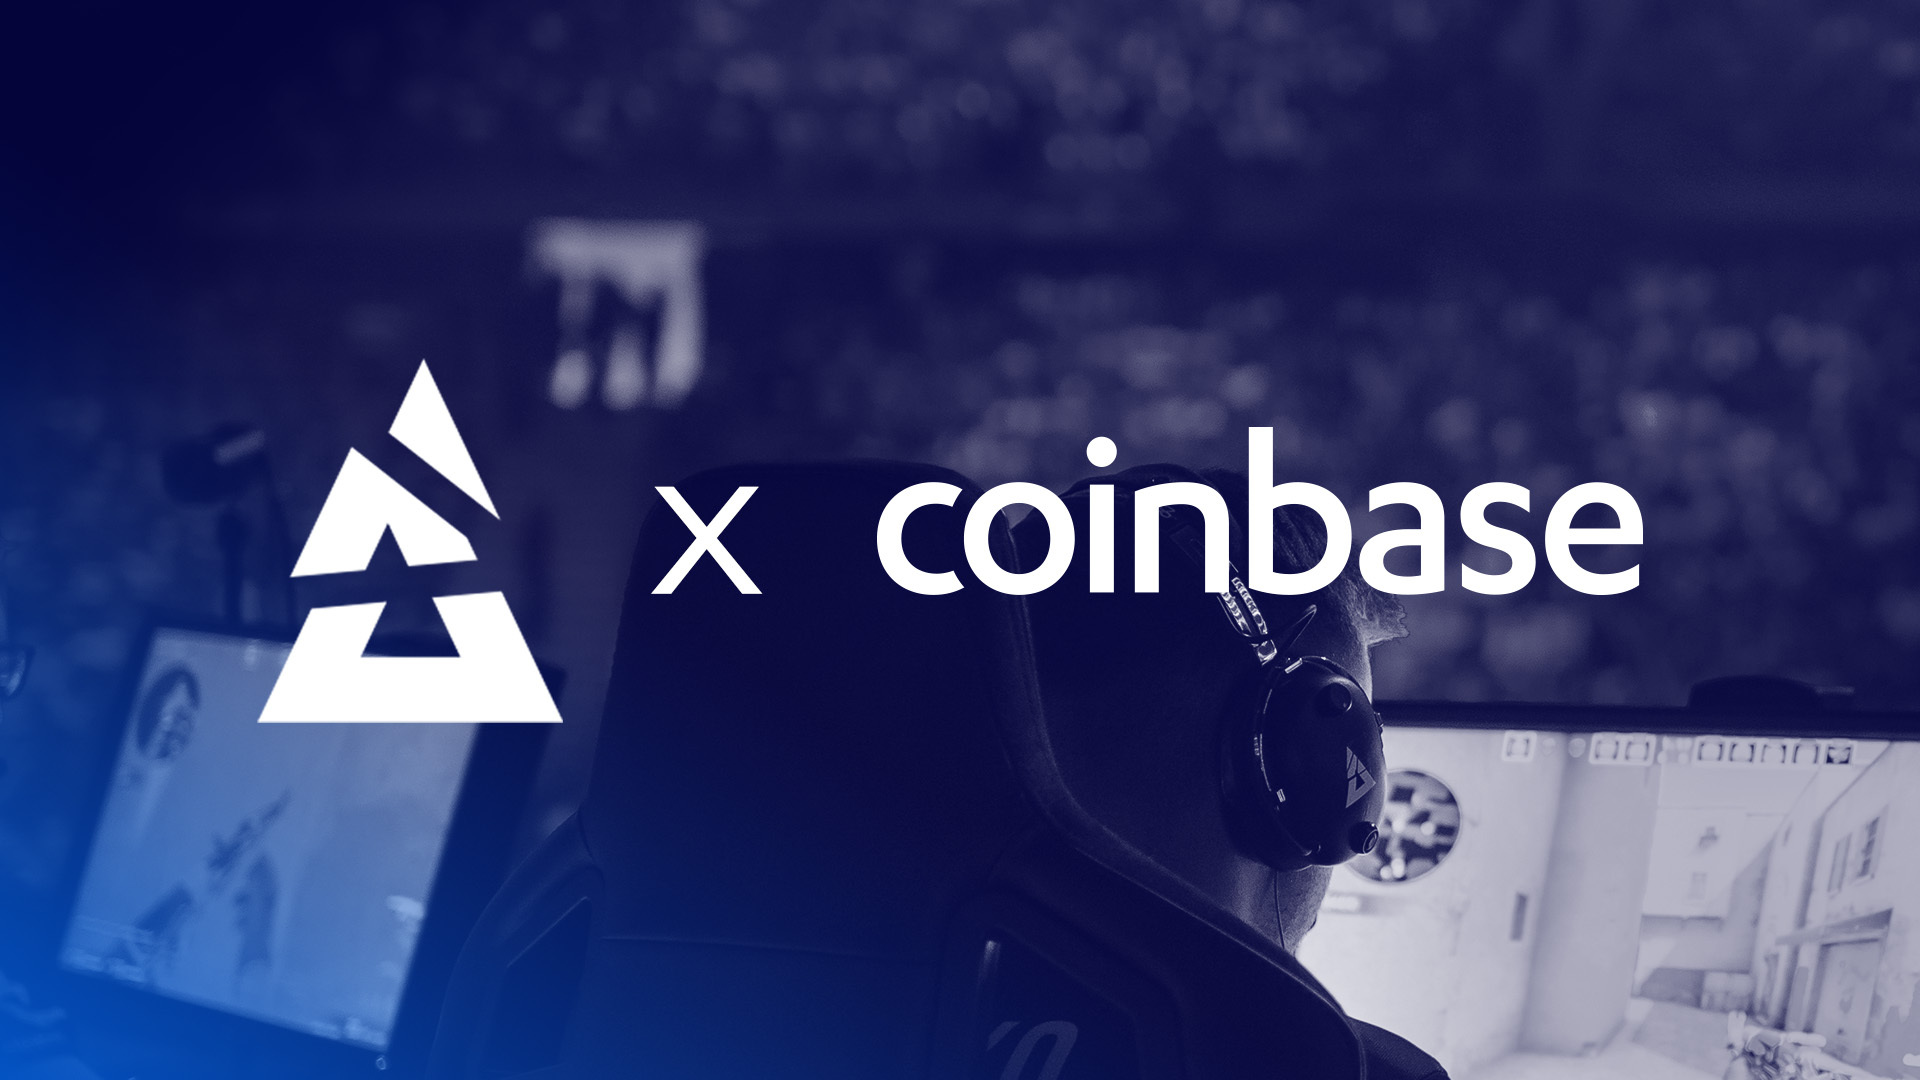 digital-worlds-of-esports-and-cryptocurrency-to-meet-in-blast-premier-and-coinbase-deal